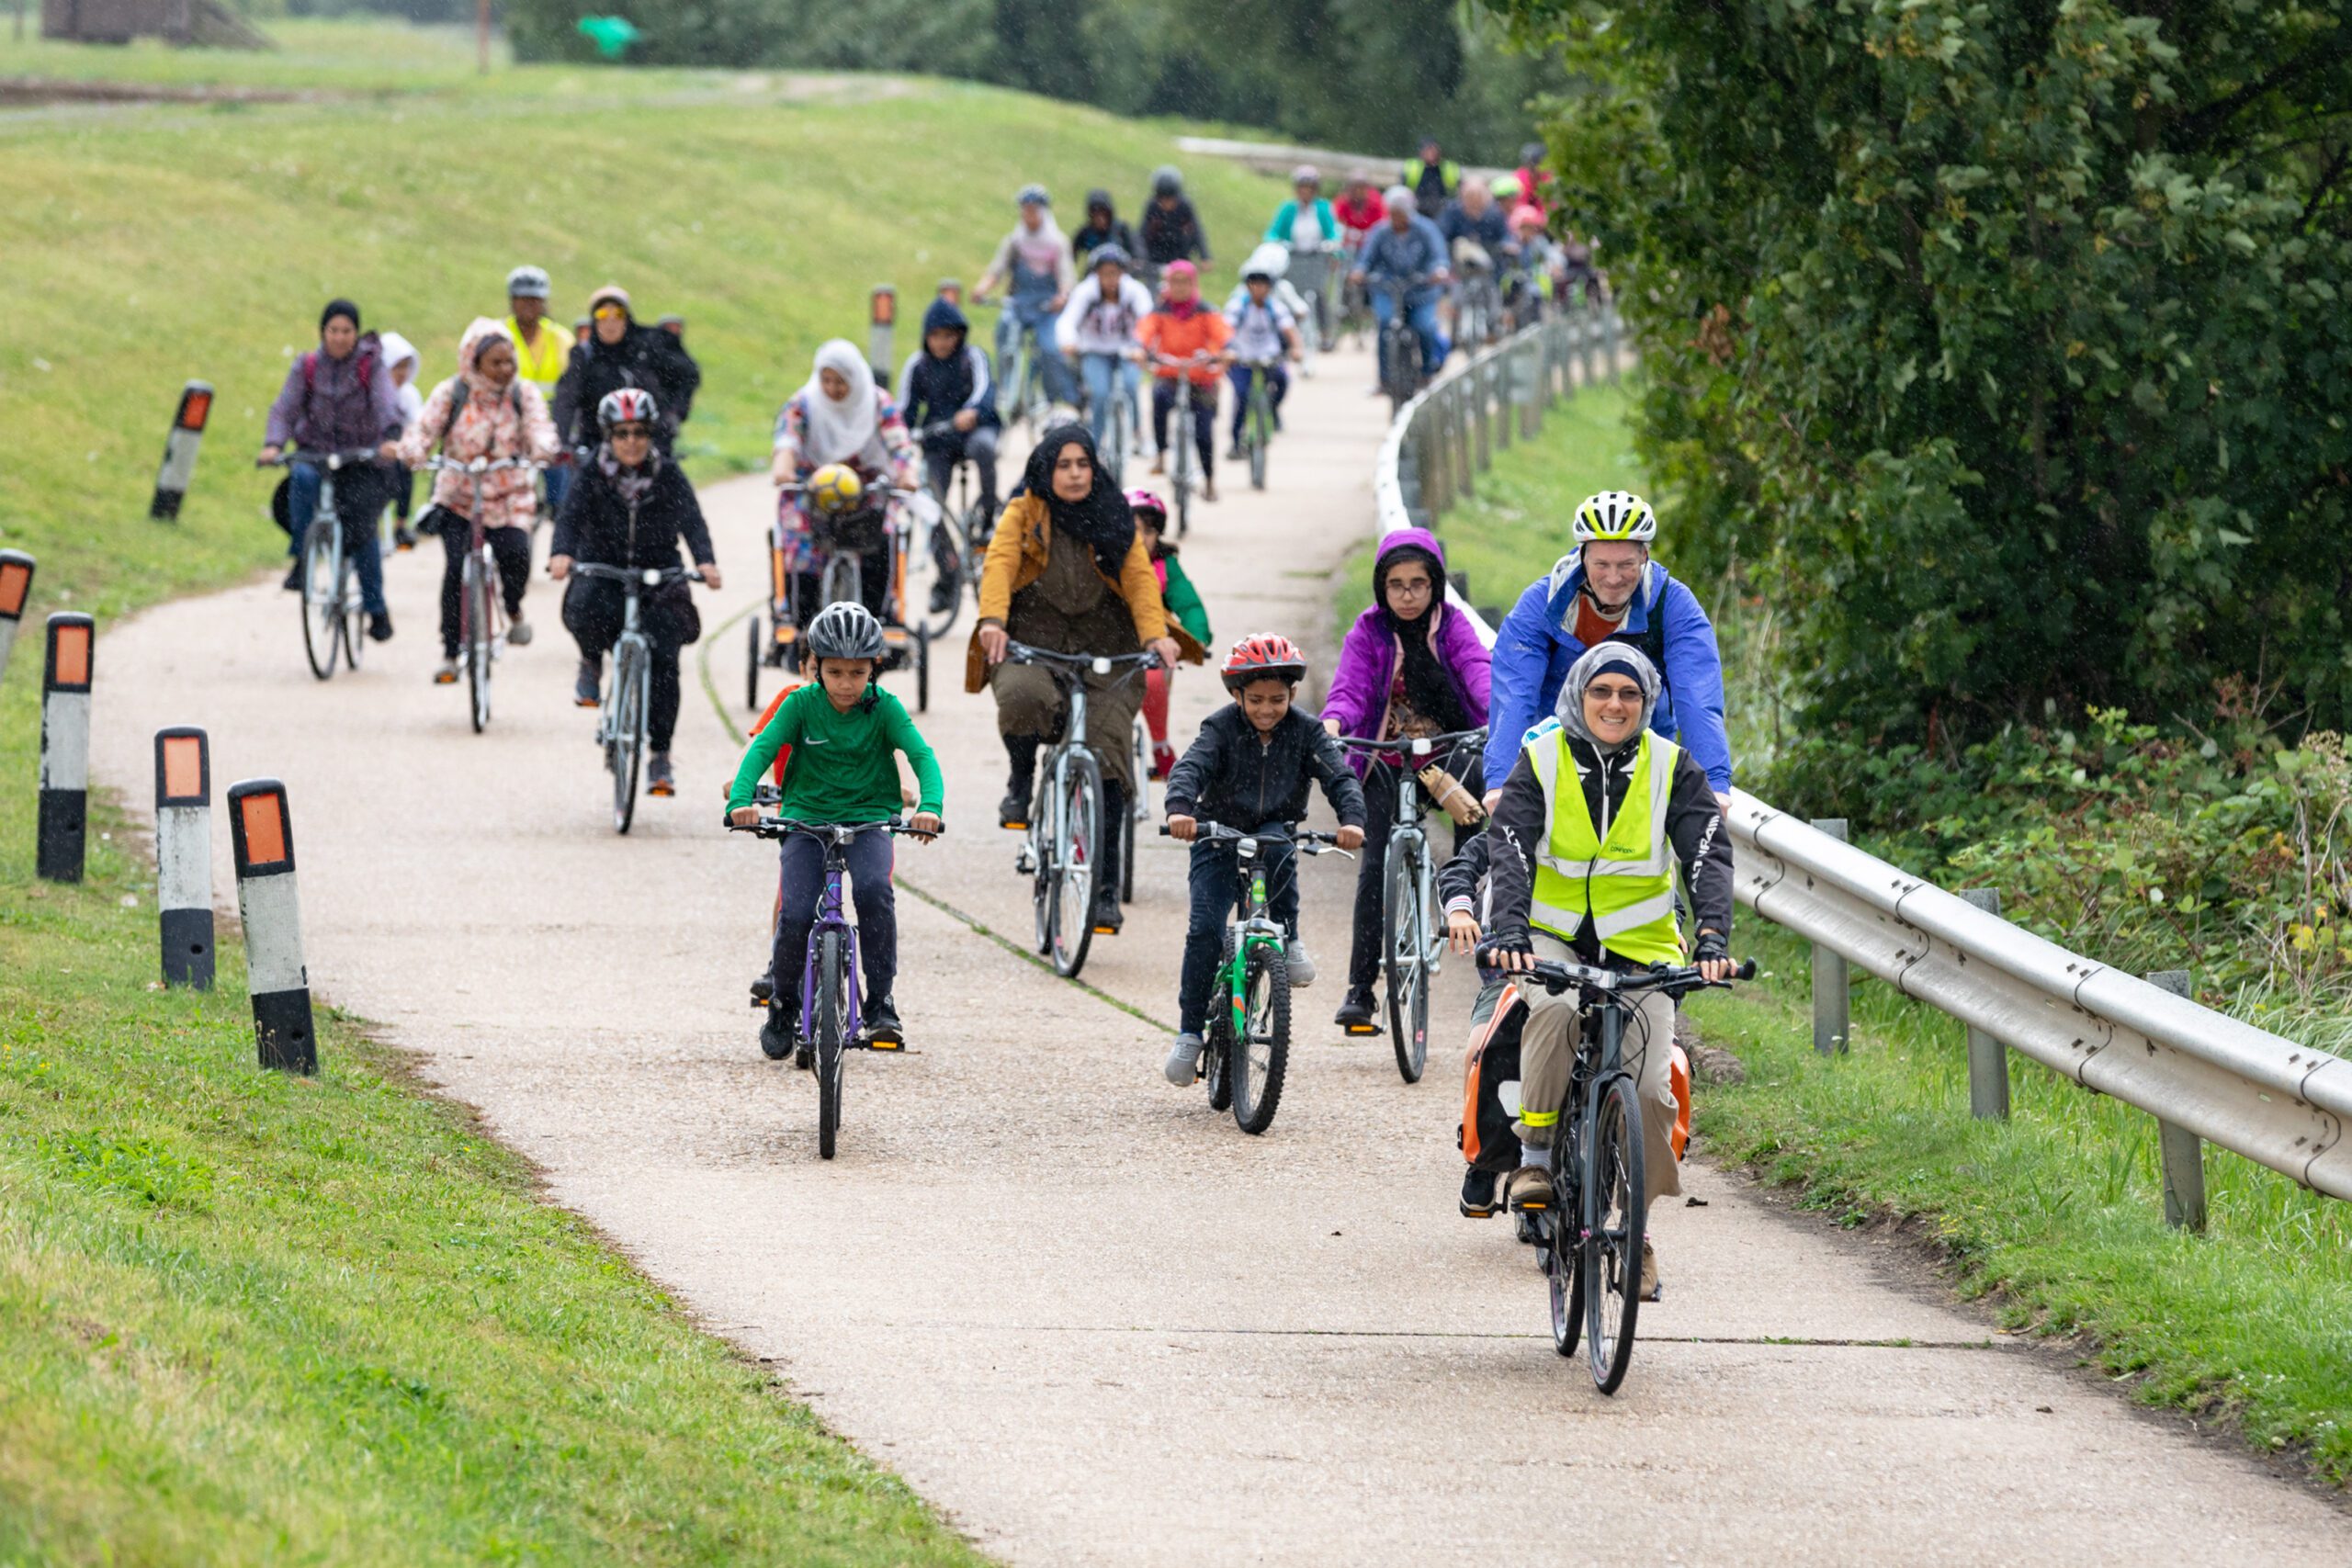 A large group of muslim men, women and children enjoying a cycle ride in a park